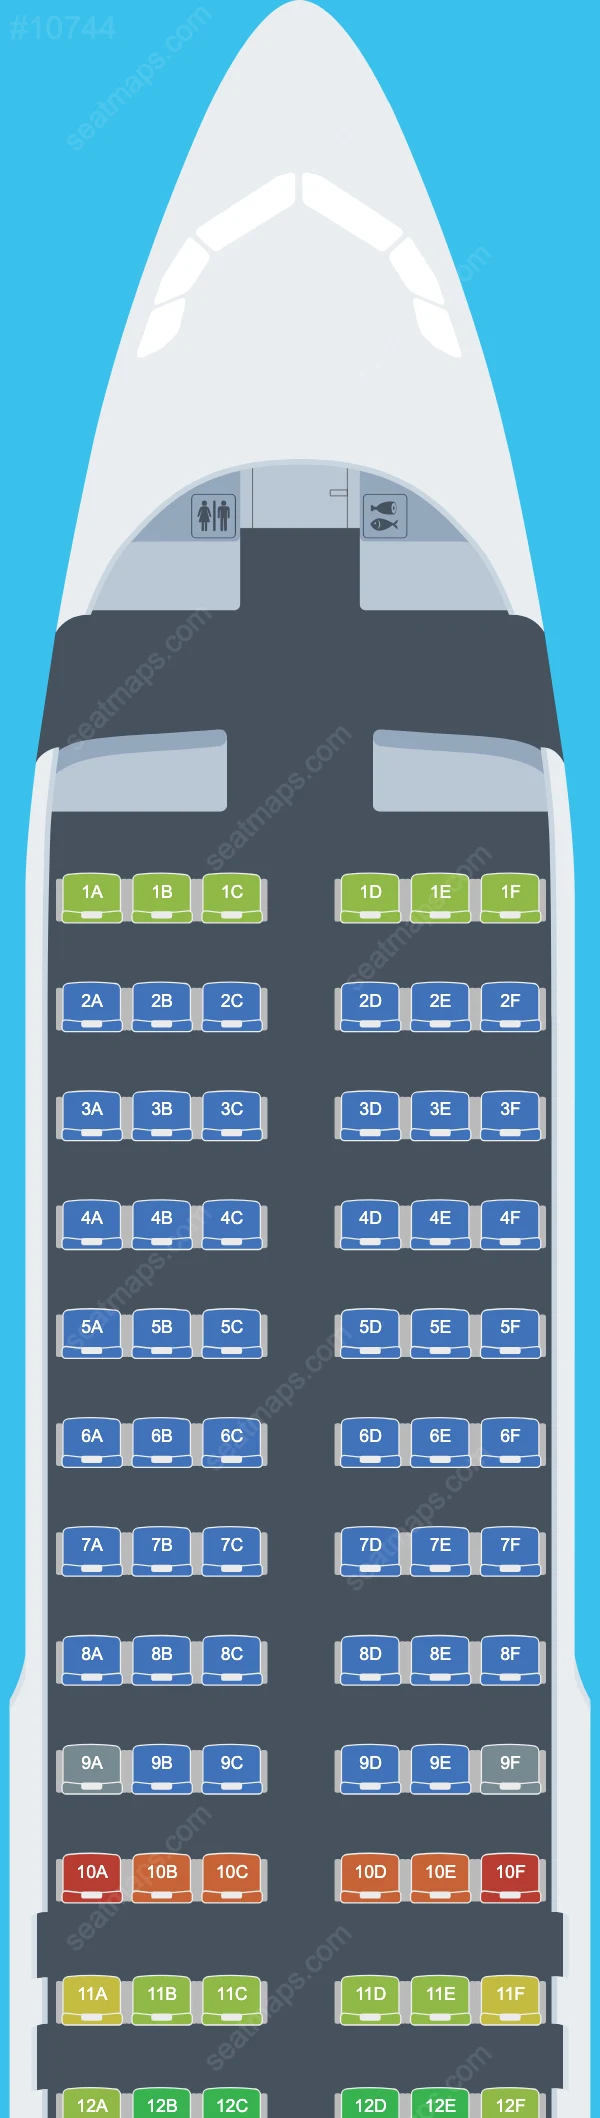 Azores Airlines Airbus A320 Seat Maps A320-200 V.2